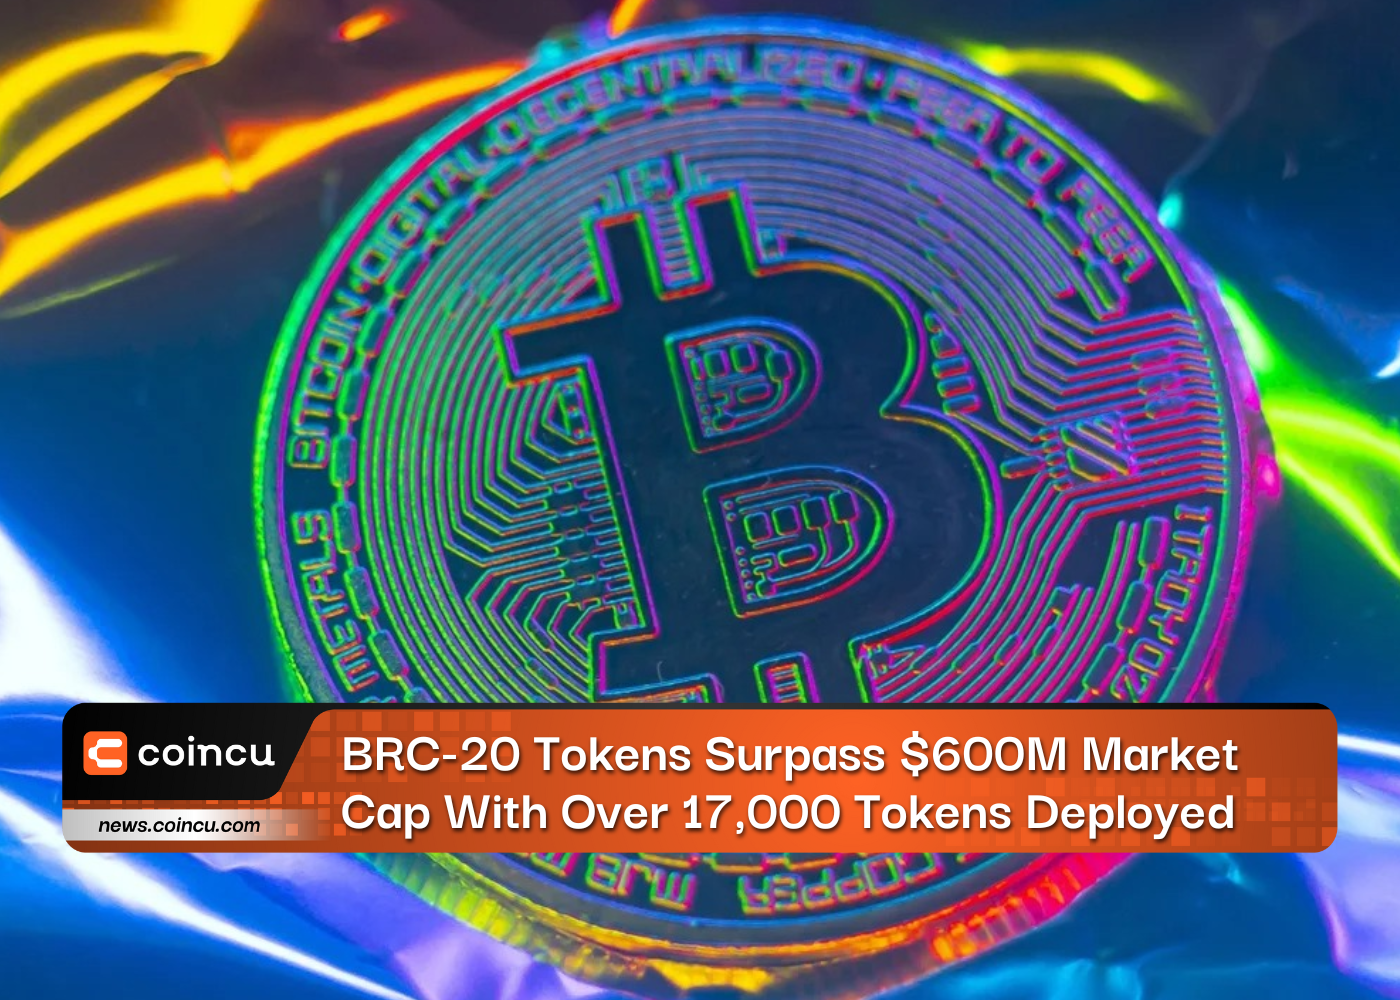 BRC-20 Tokens Surpass $600M Market Cap With Over 17,000 Tokens Deployed